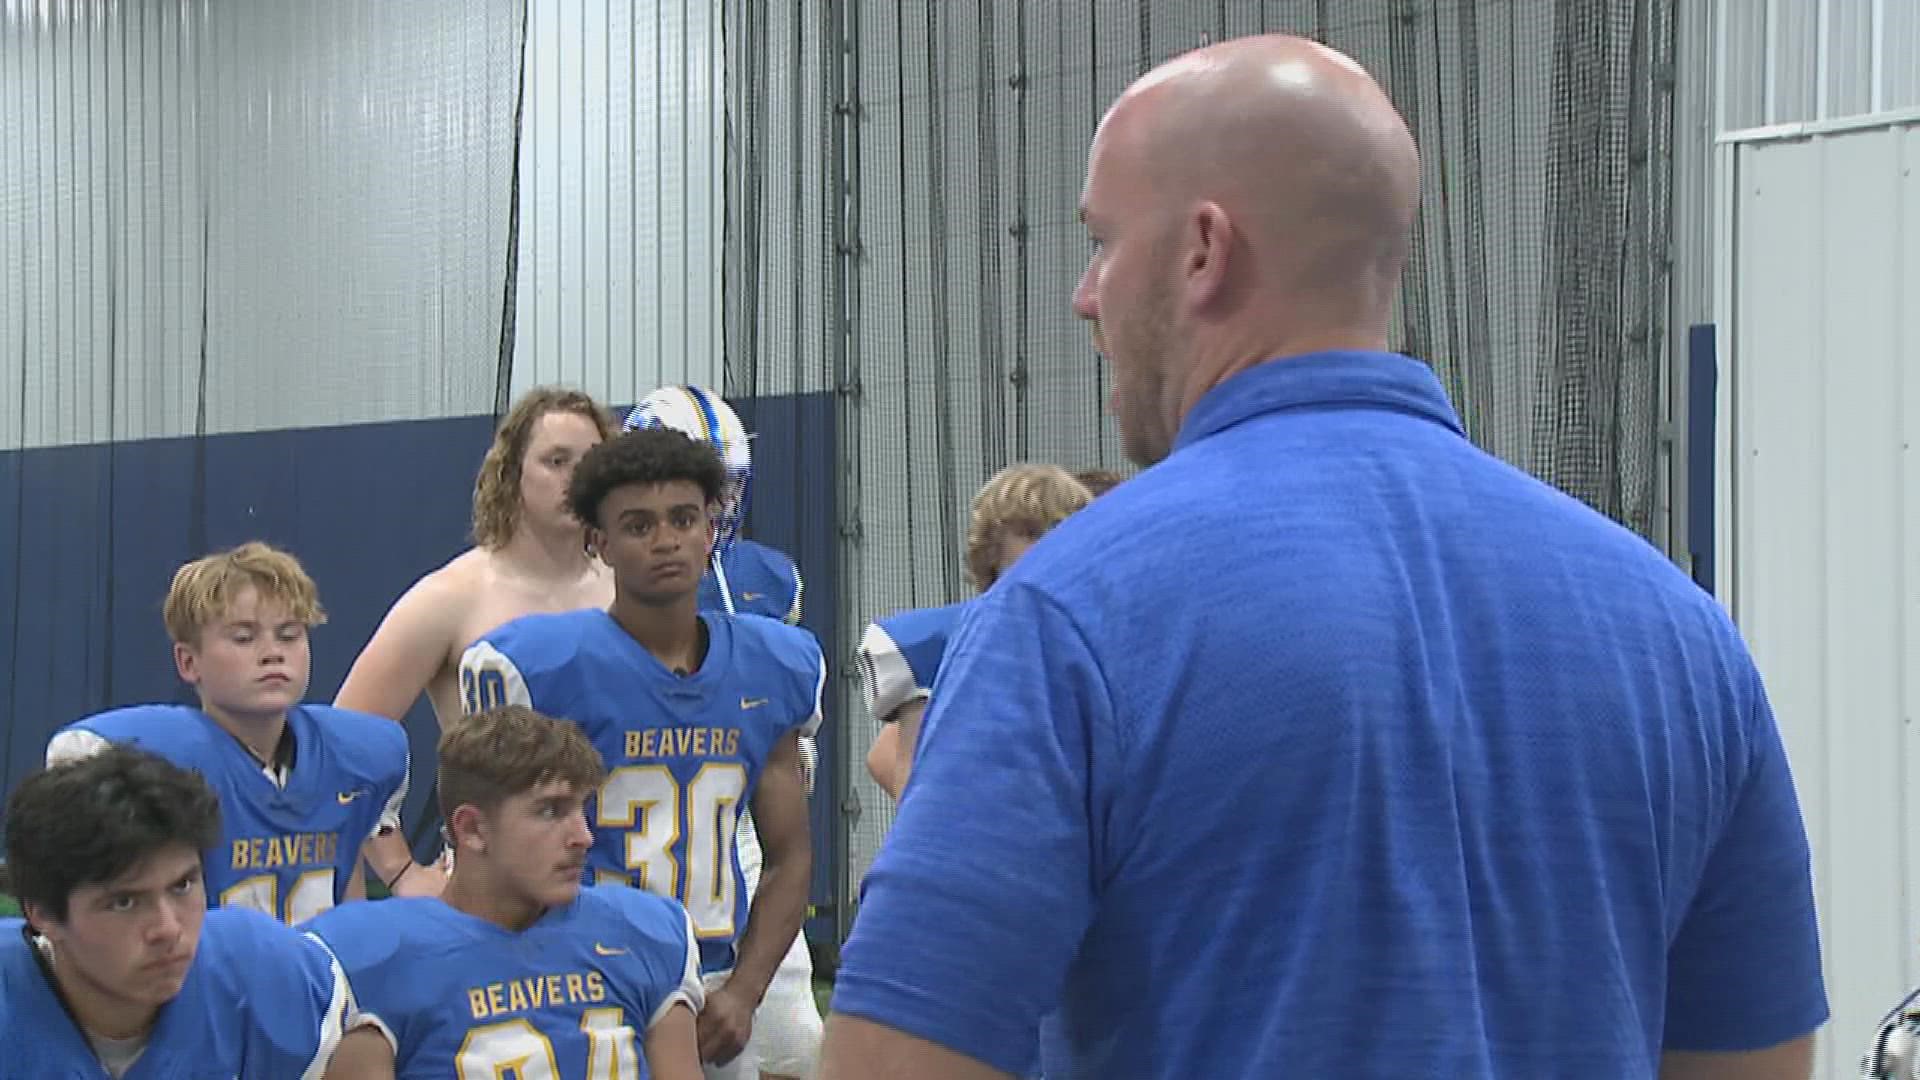 Wilton head coach Ryan Hetzler gives his Beaver team a pregame motivational speech as they take on Durant in week 4.